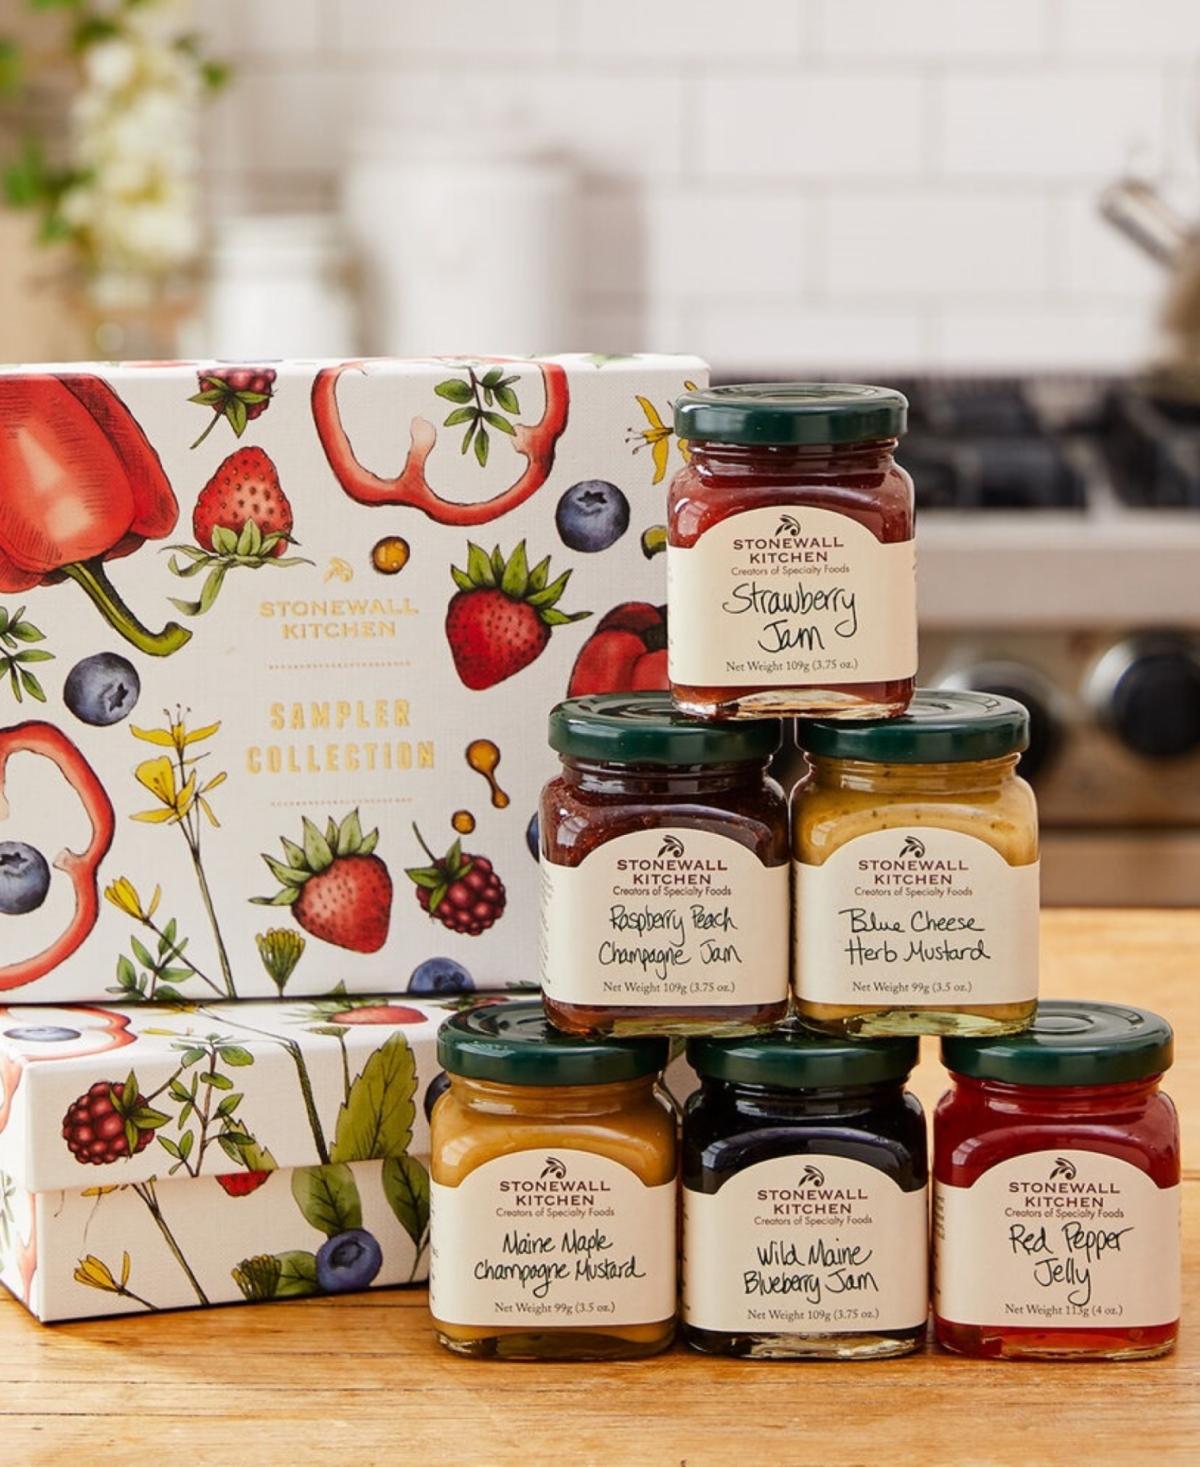 Stonewall Kitchen Classic Jam Sampler Collection Gift Set